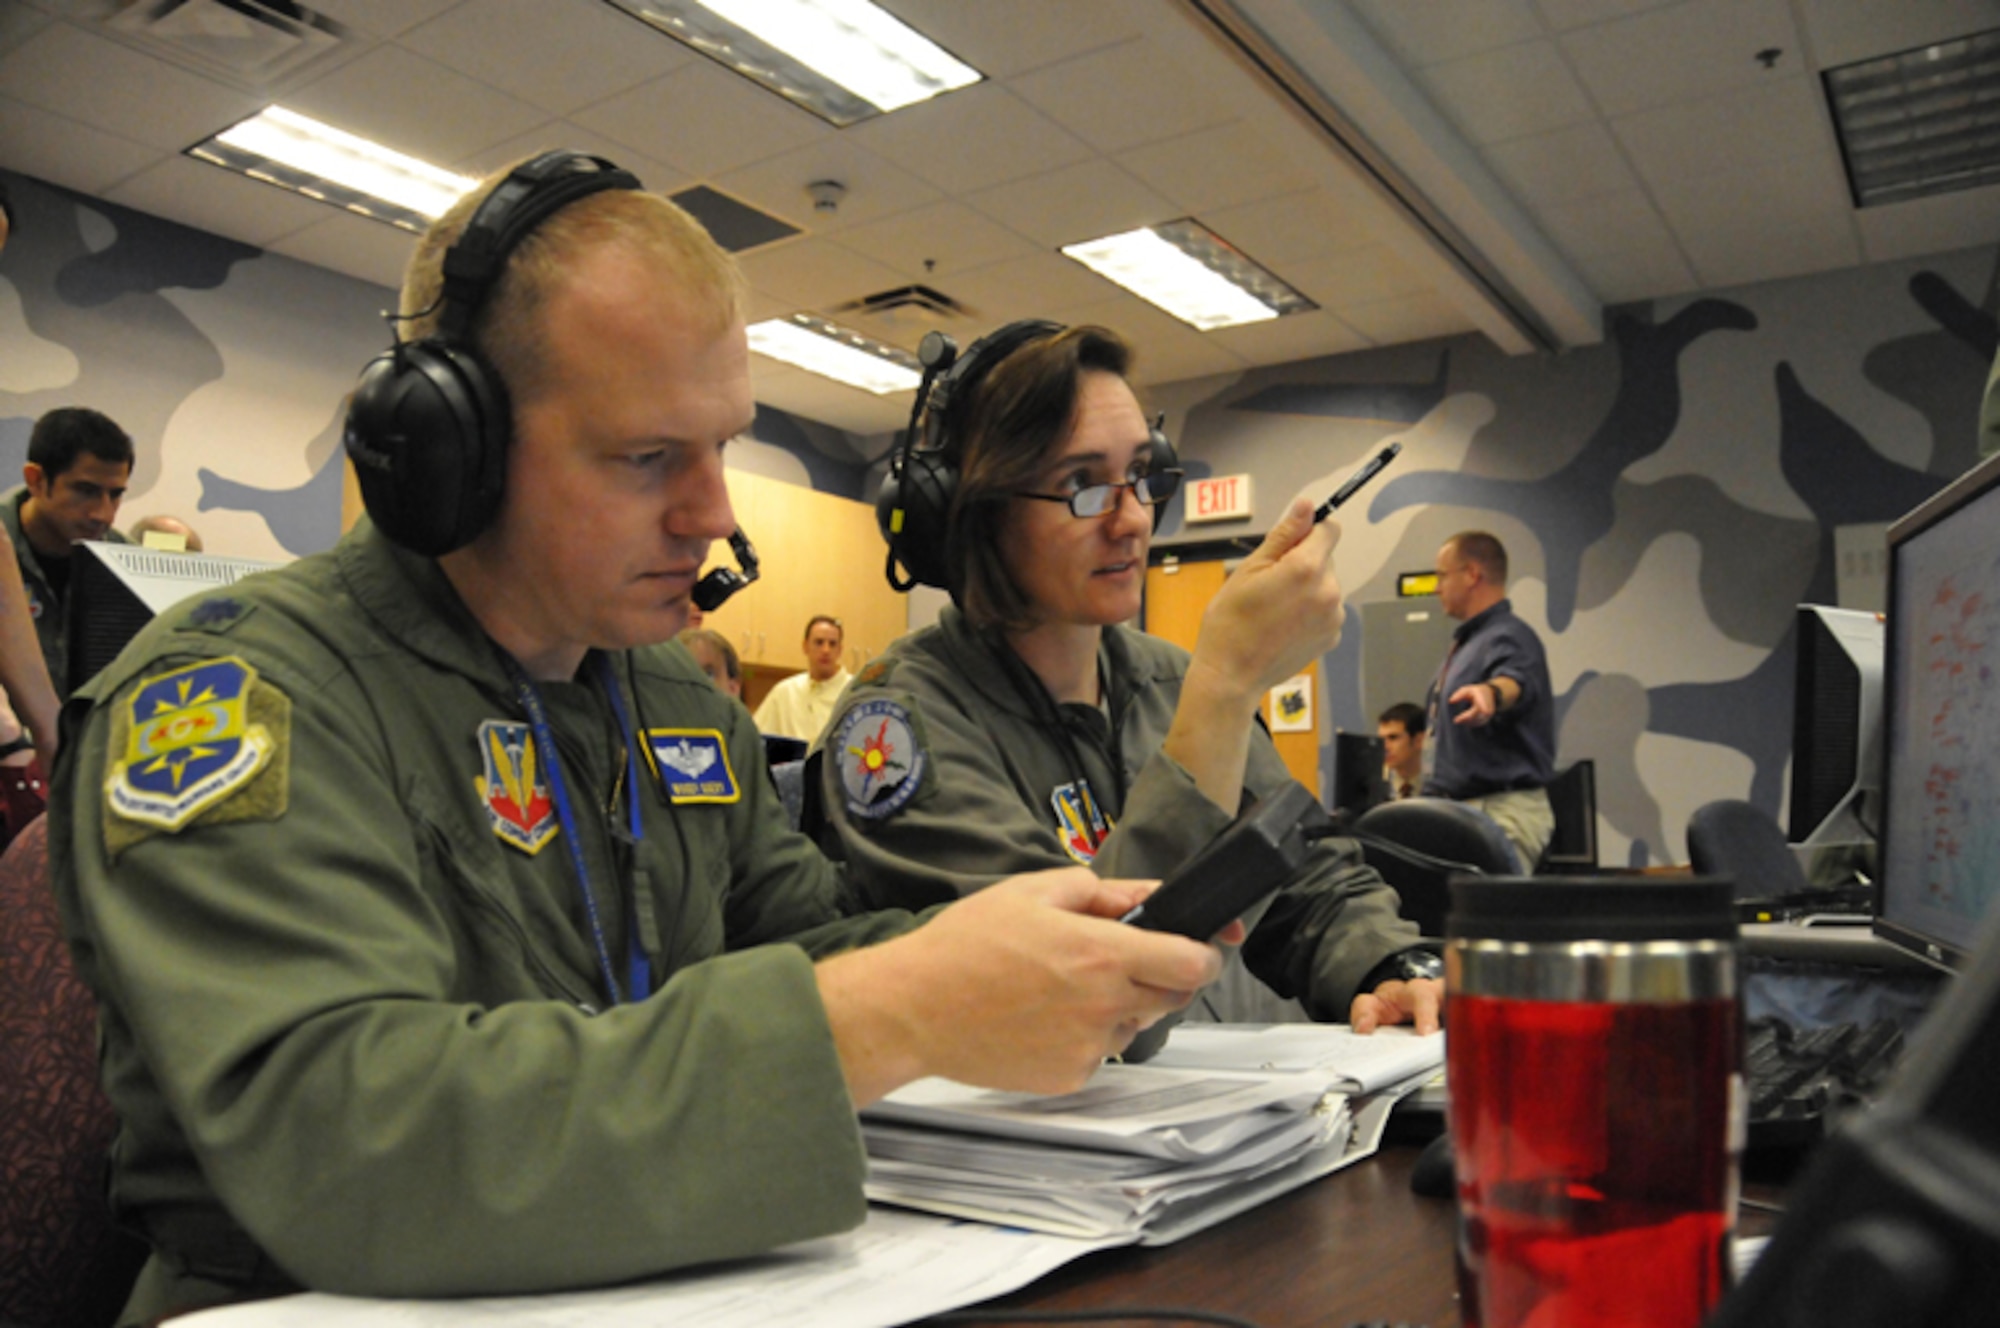 KIRTLAND AIR FORCE BASE, N.M. -- Lt. Col. Brynt Query, senior exercise director for the 705th Combat Training Squadron, and Maj. Michele Boyko, 705th CTS and exercise director for Coalition Virtual Flag 09-4, compare data during the exercise Sept. 18 at the Distributed Mission Operations Center. Coalition Virtual Flag 09-4 was the first ever exercise to integrate four coalition forces and air assets, and U.S. joint forces in a virtual air battle spanning operational- and tactical-level warfare. (Air Force photo by Ken Moore)